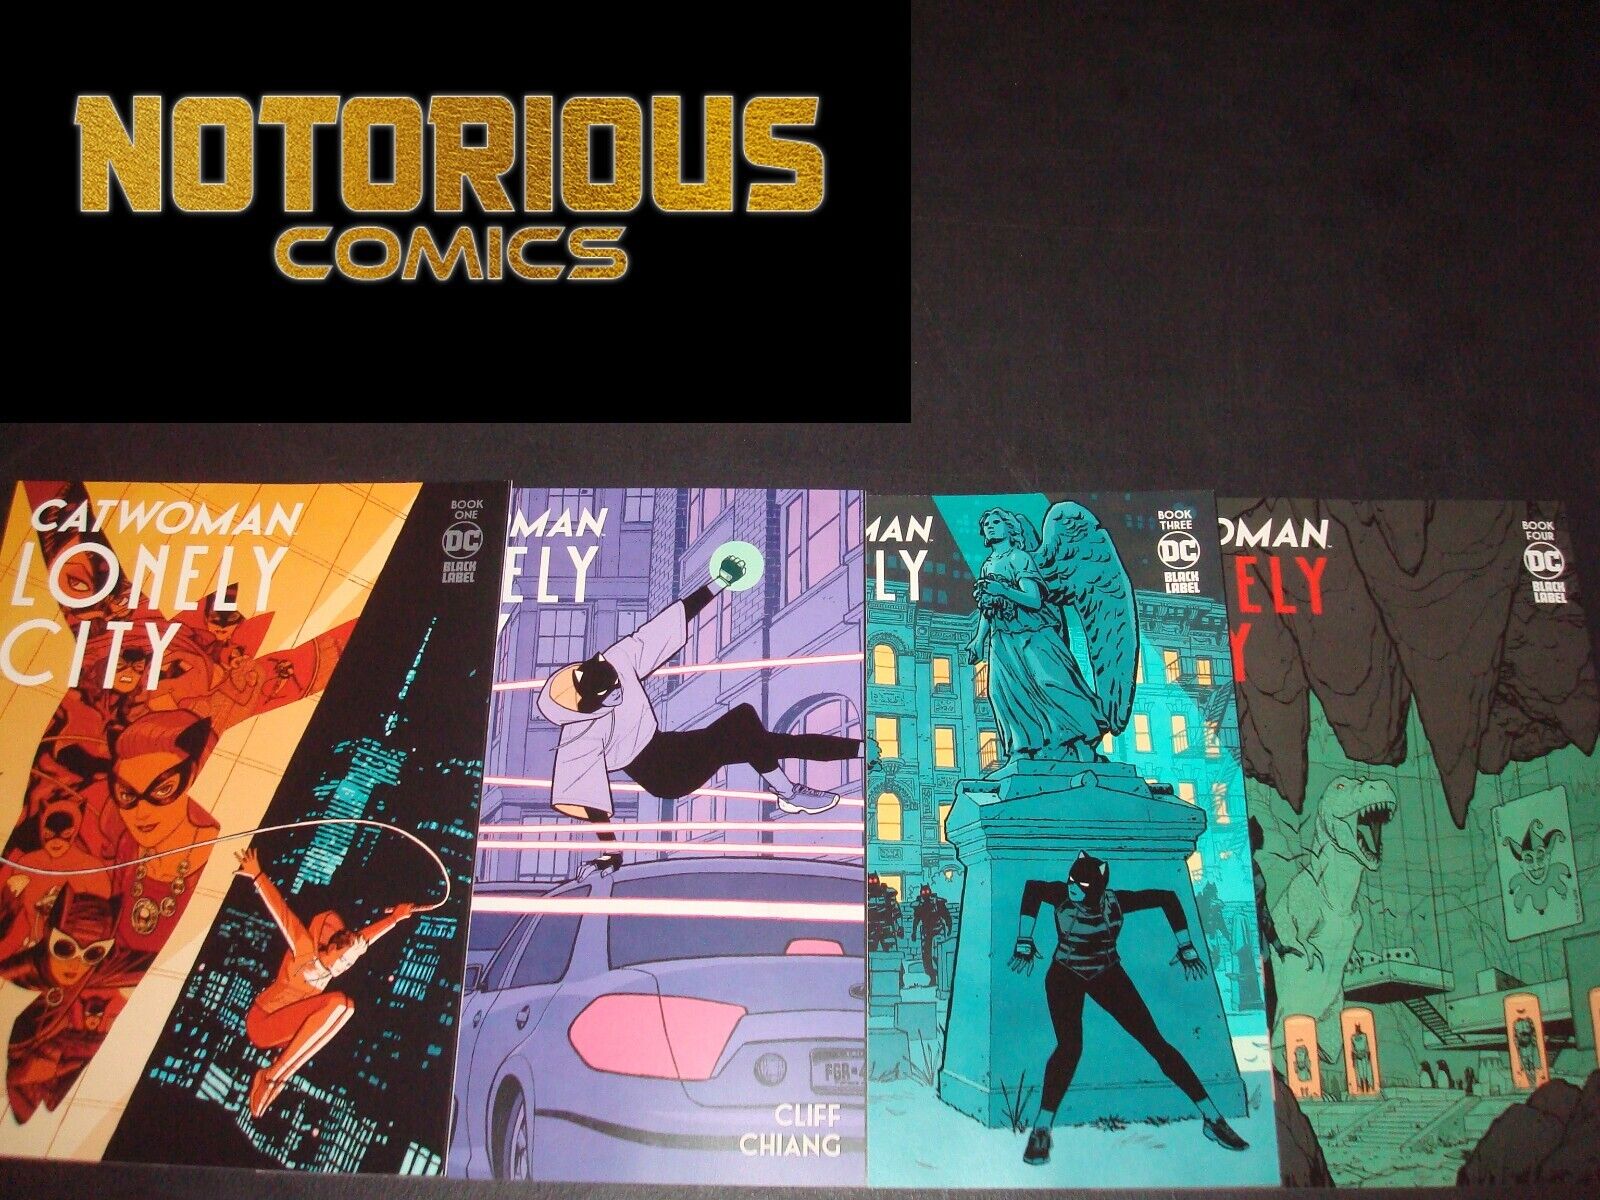 Catwoman Lonely City 1-4 Complete Comic Lot Set Chiang DC Black Collection